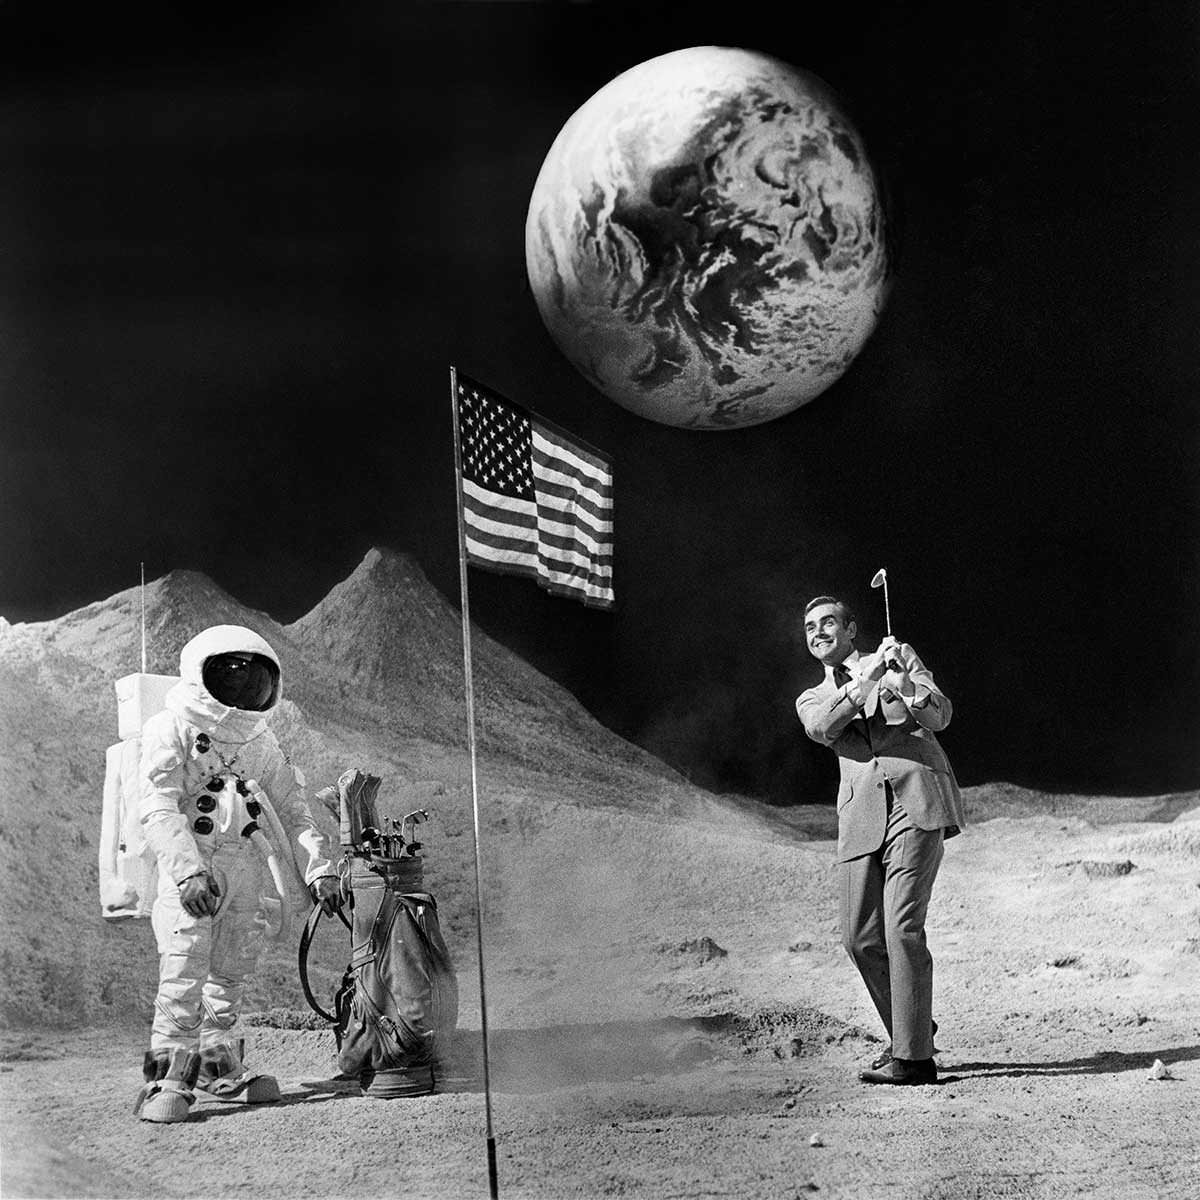 Sean Connery playing golf in between shooting the moon landing scene in Diamonds Are Forever in 1971.